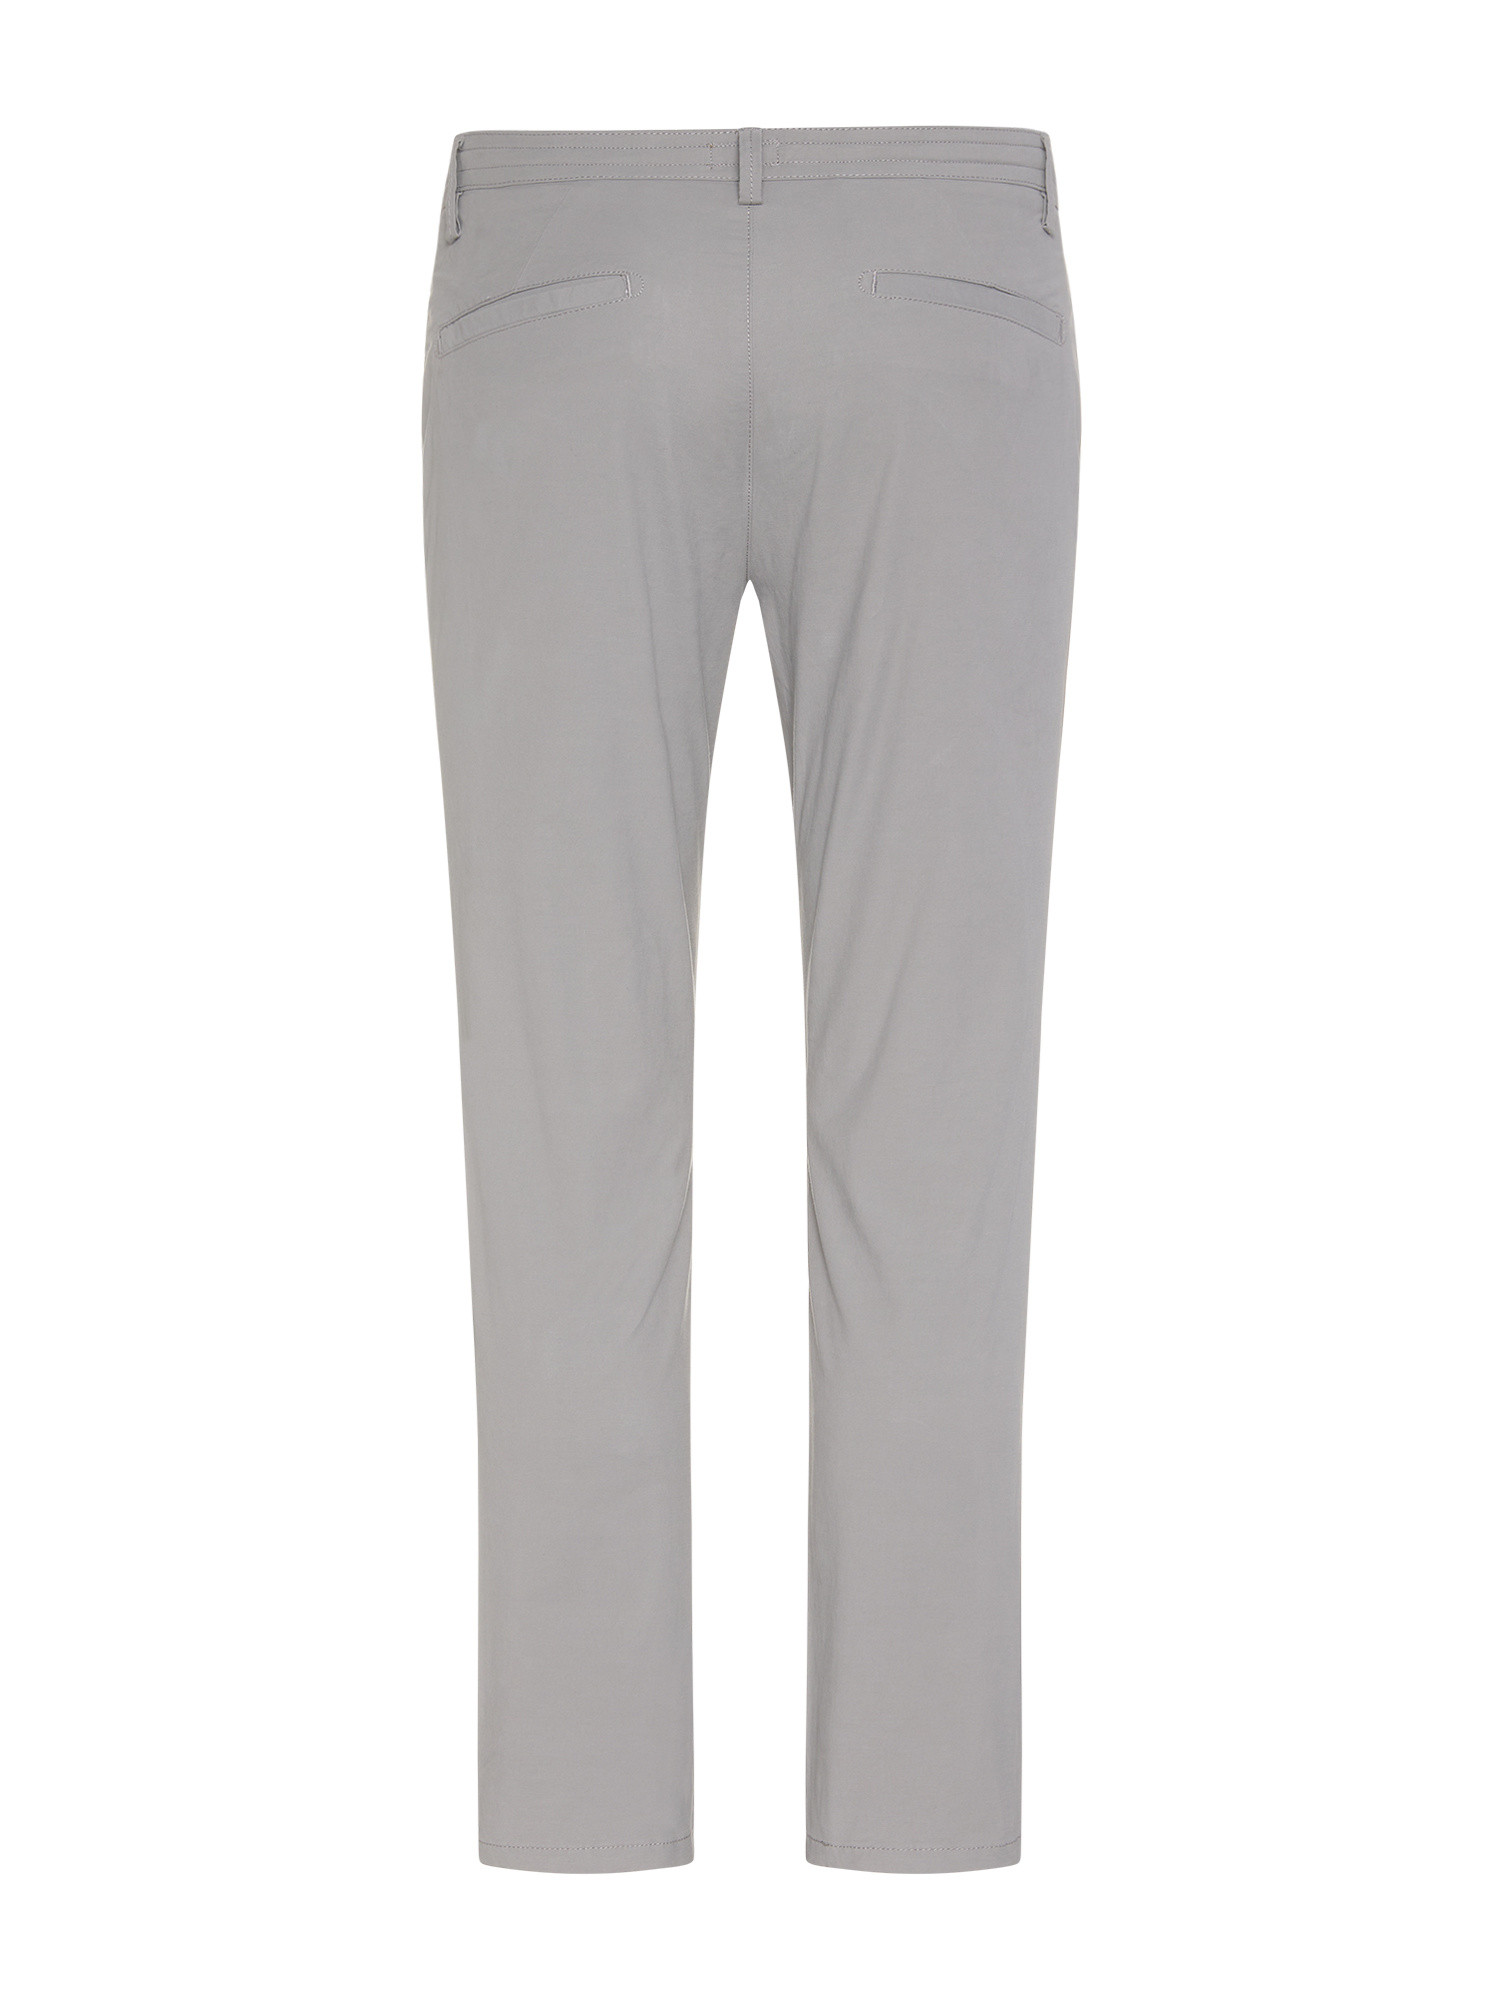 JCT - Slim fit chino jogger, Grey, large image number 1